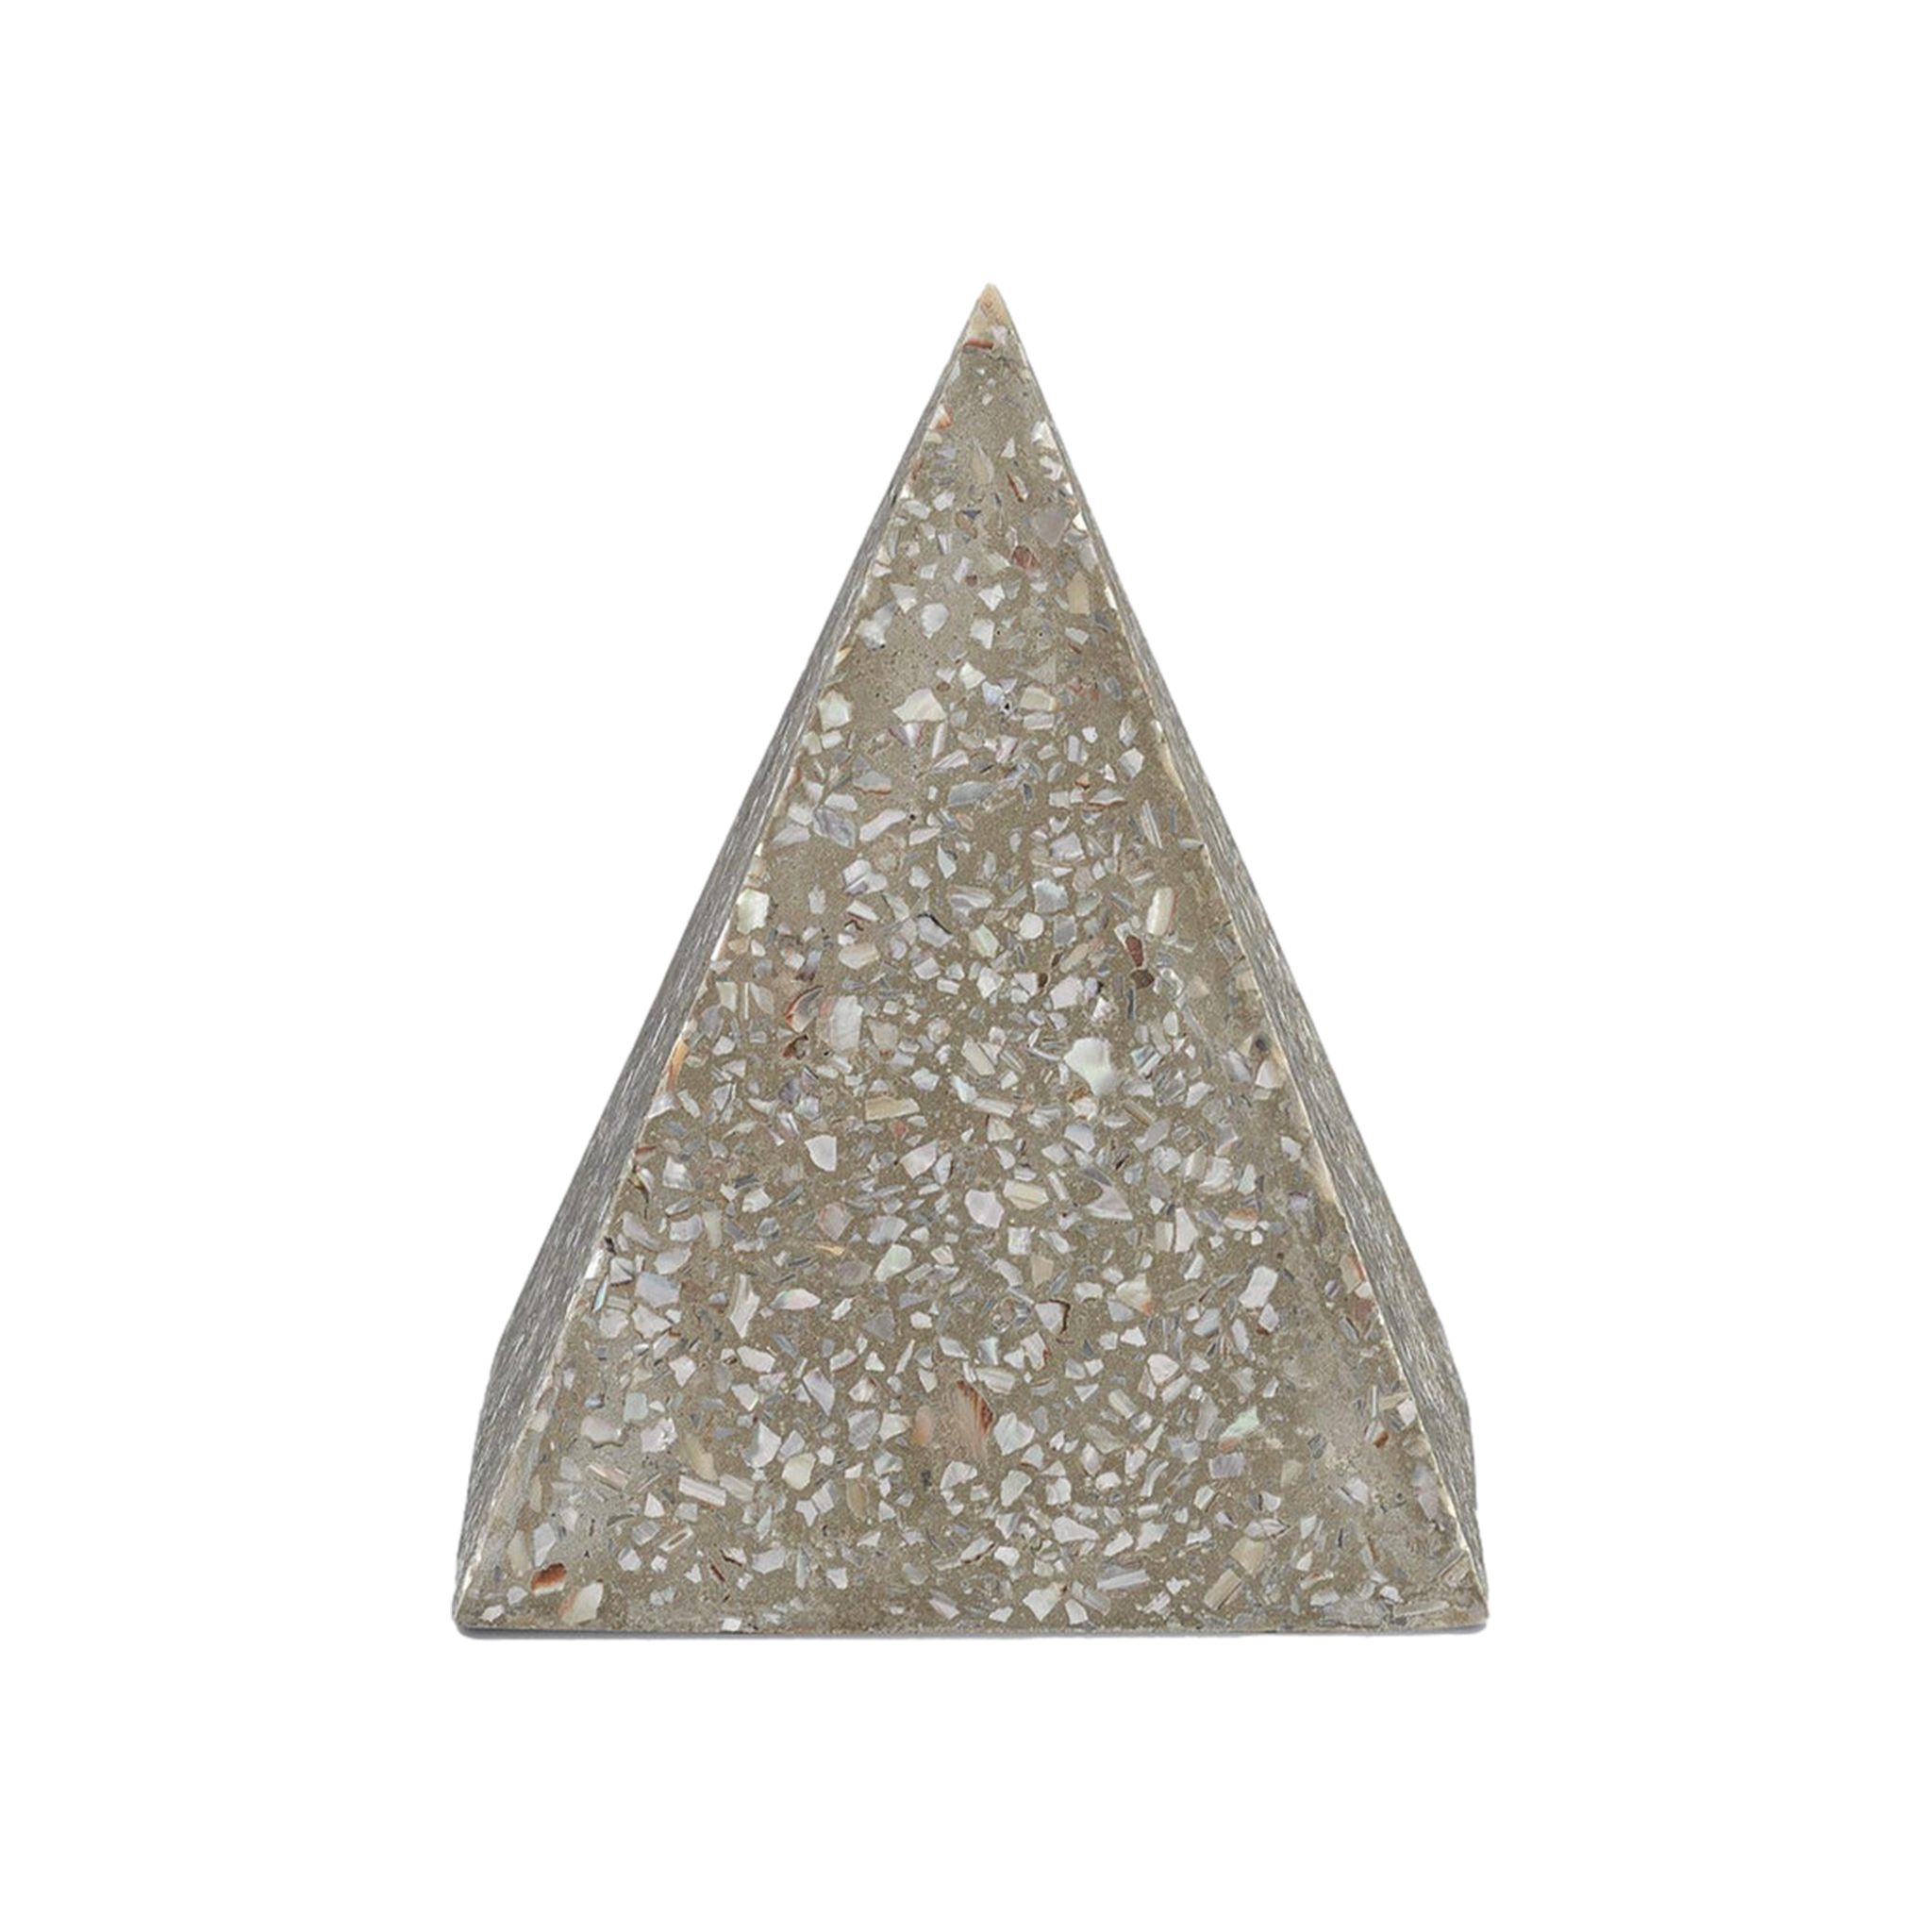 http://www.maykerinteriors.com/cdn/shop/products/Mayker-Interiors-MODERN-FURNITURE-STORE-Nashville-INTERIOR-DESIGNER-Decor-Textiles-Decorative-Objects-Abalone-Large-Concrete-Pyramid_2.png?v=1664241207